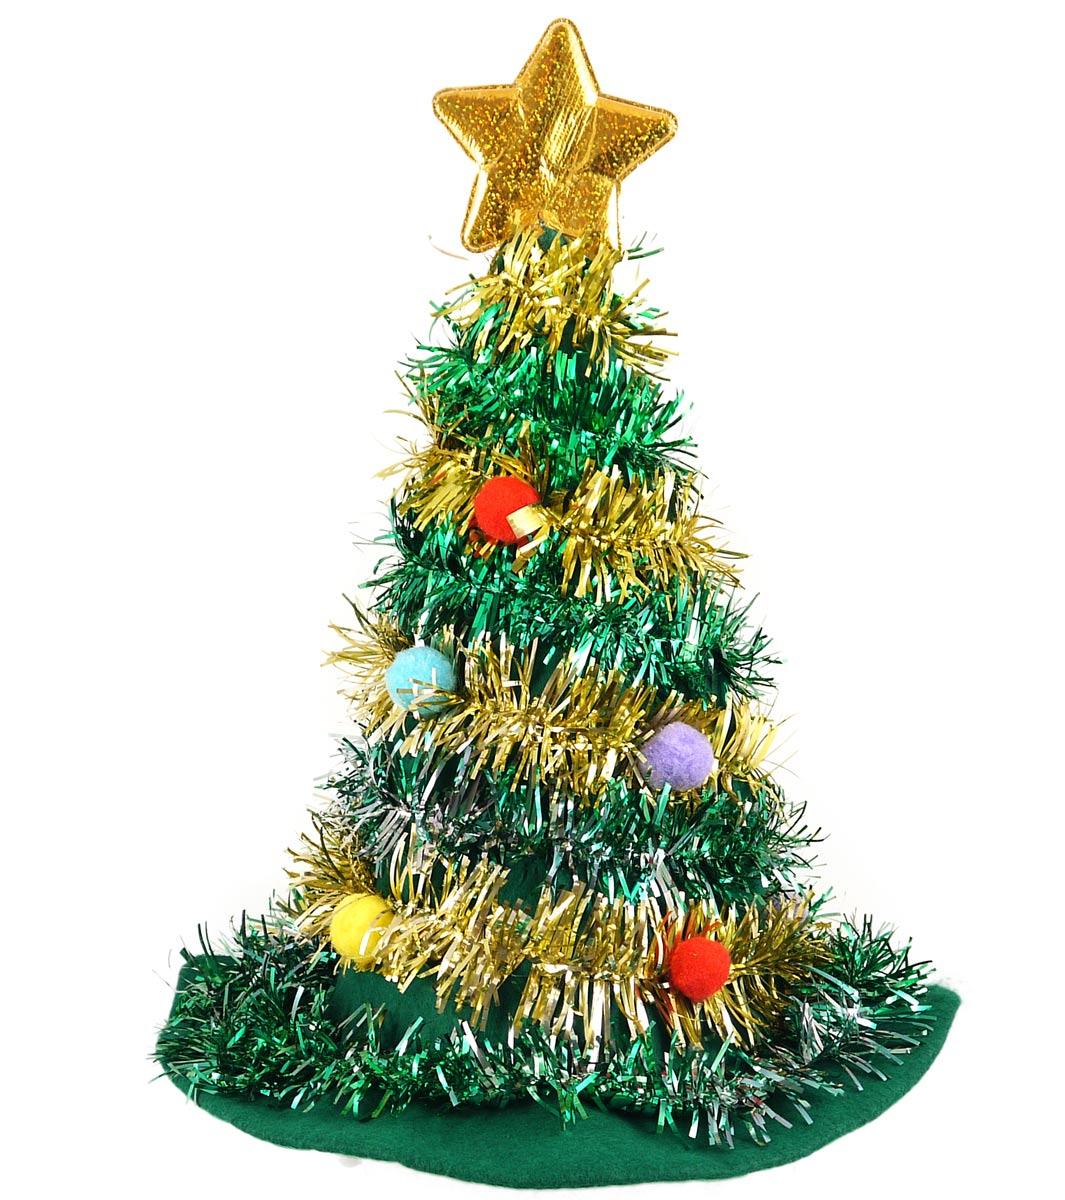 Green Novelty Christmas Tree Hat with Gold tinsel, coloured baubles and big gold star. By Henbrandt W09855 available here at Karnival Costumes online Christmas party shop